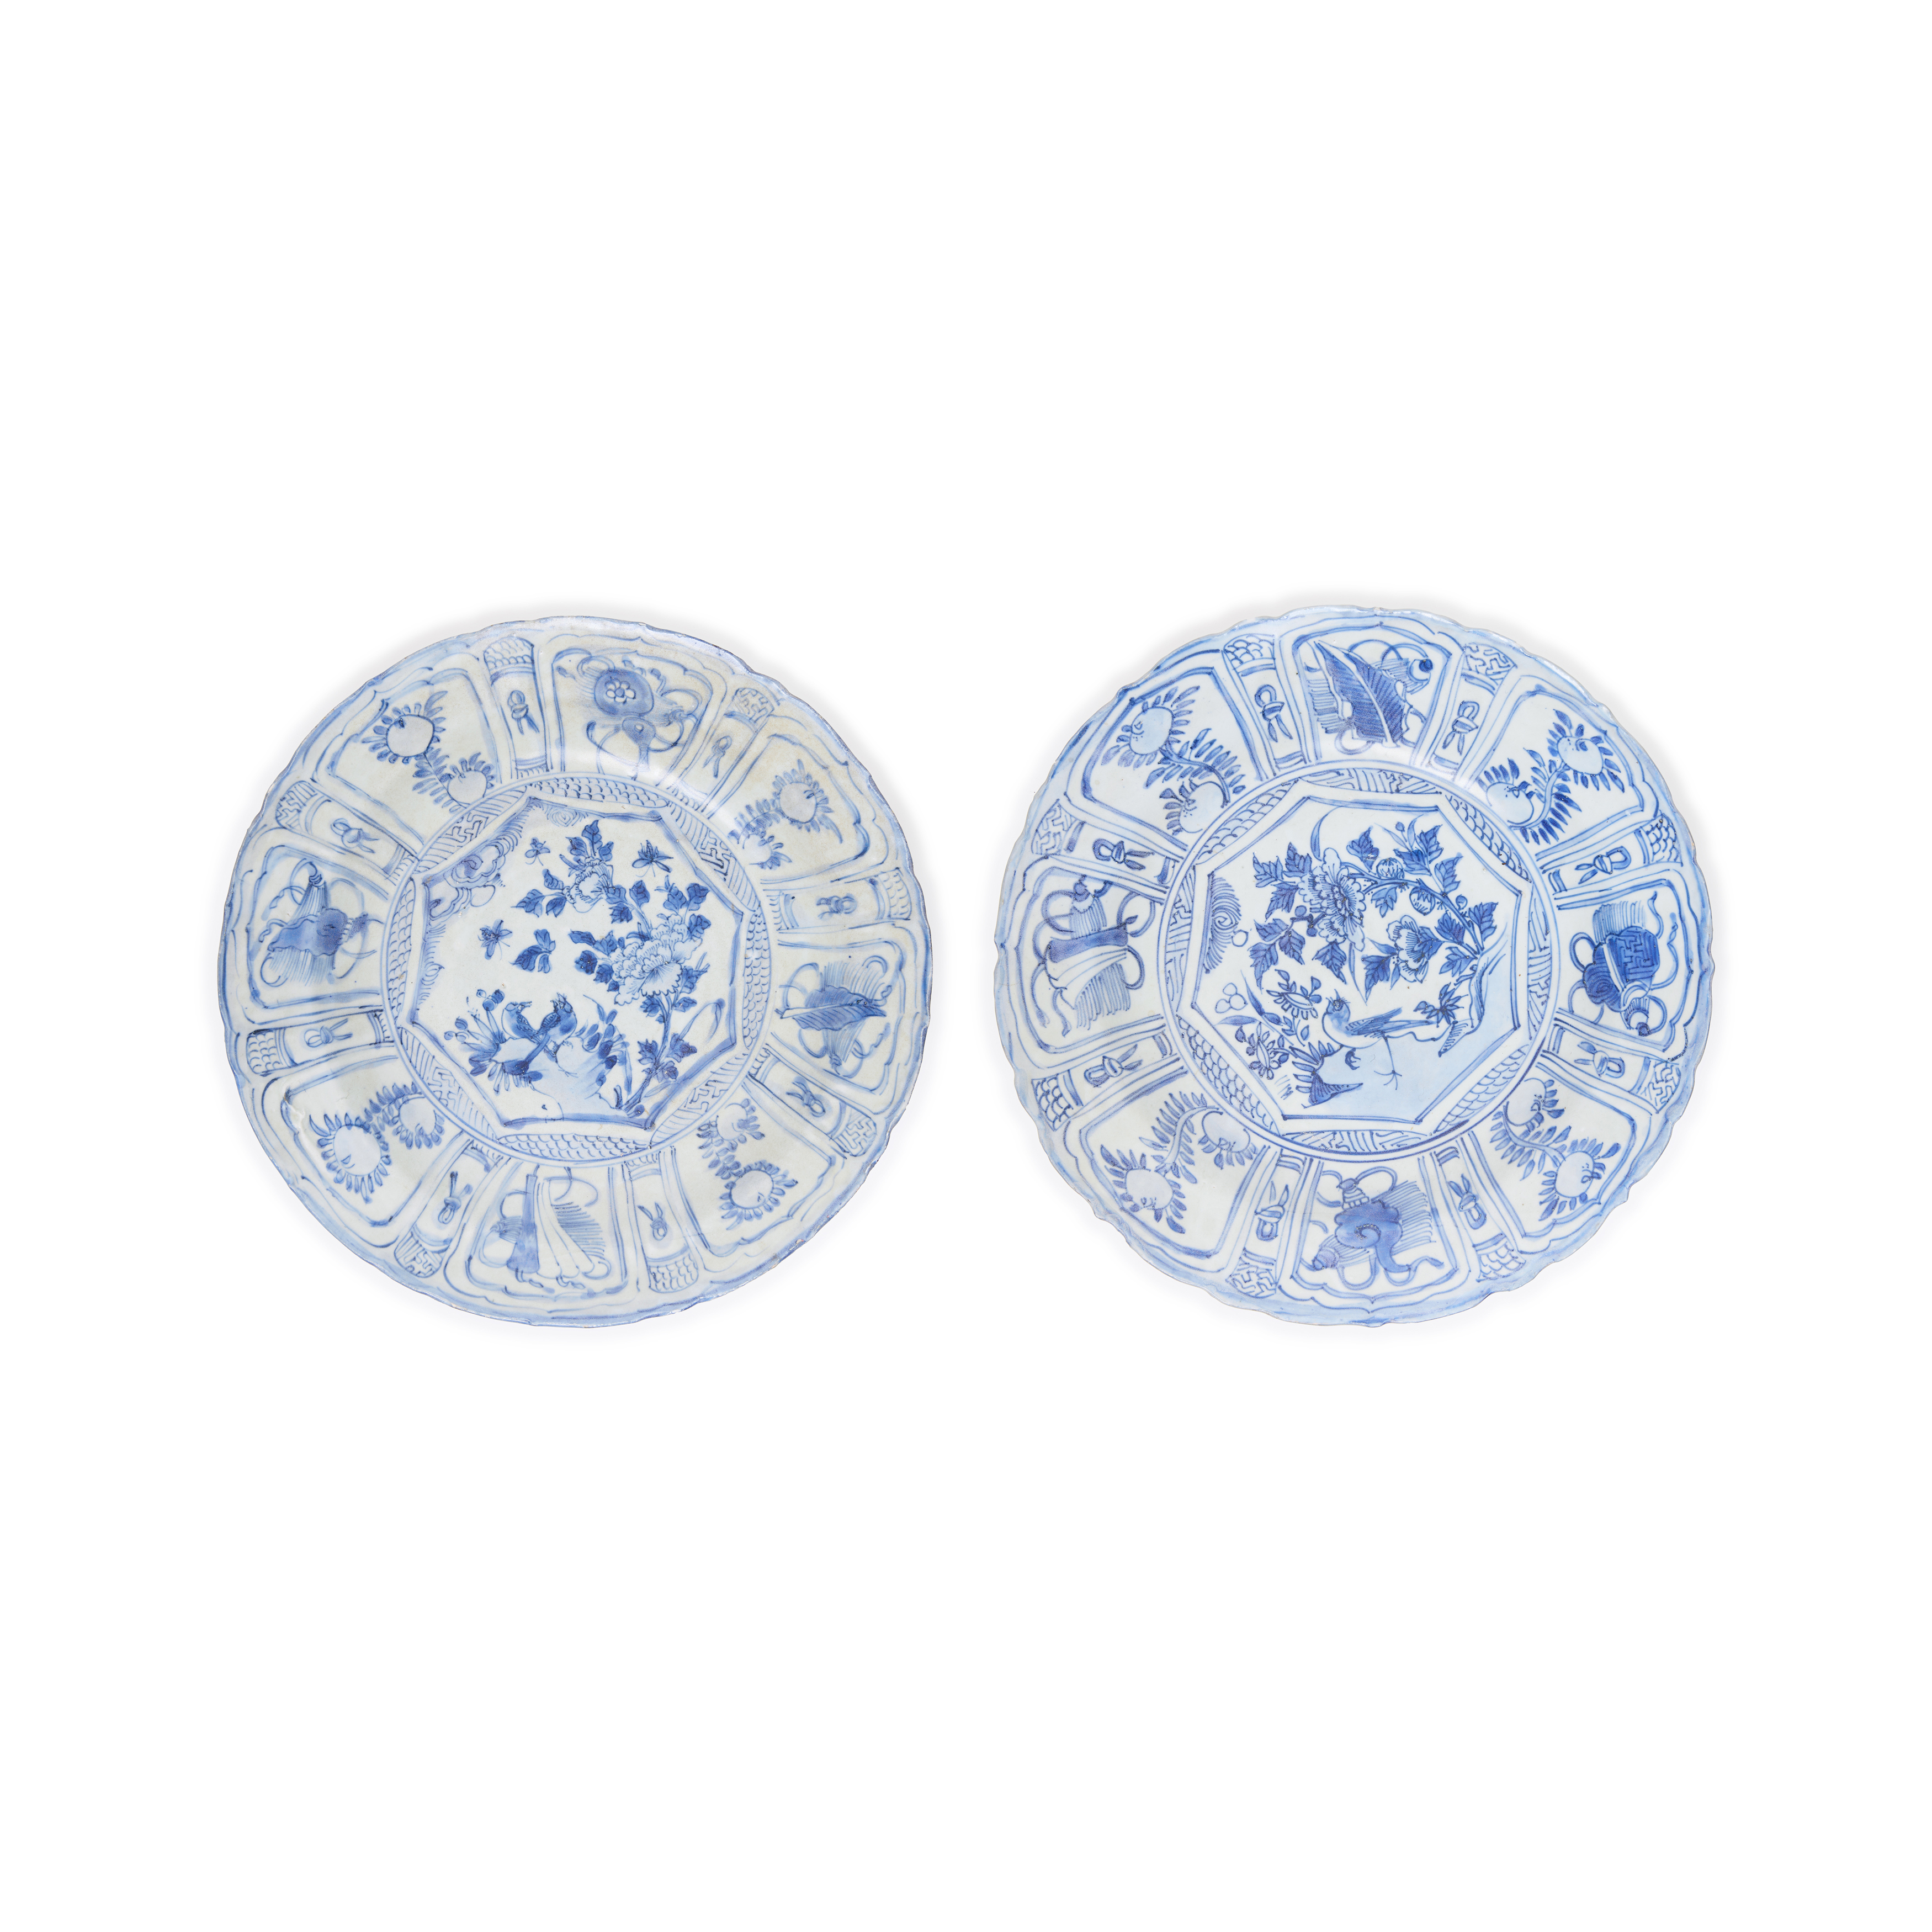 A pair of Chinese Kraak blue and white dishes Transitional, mid-17th century Painted to the cen...